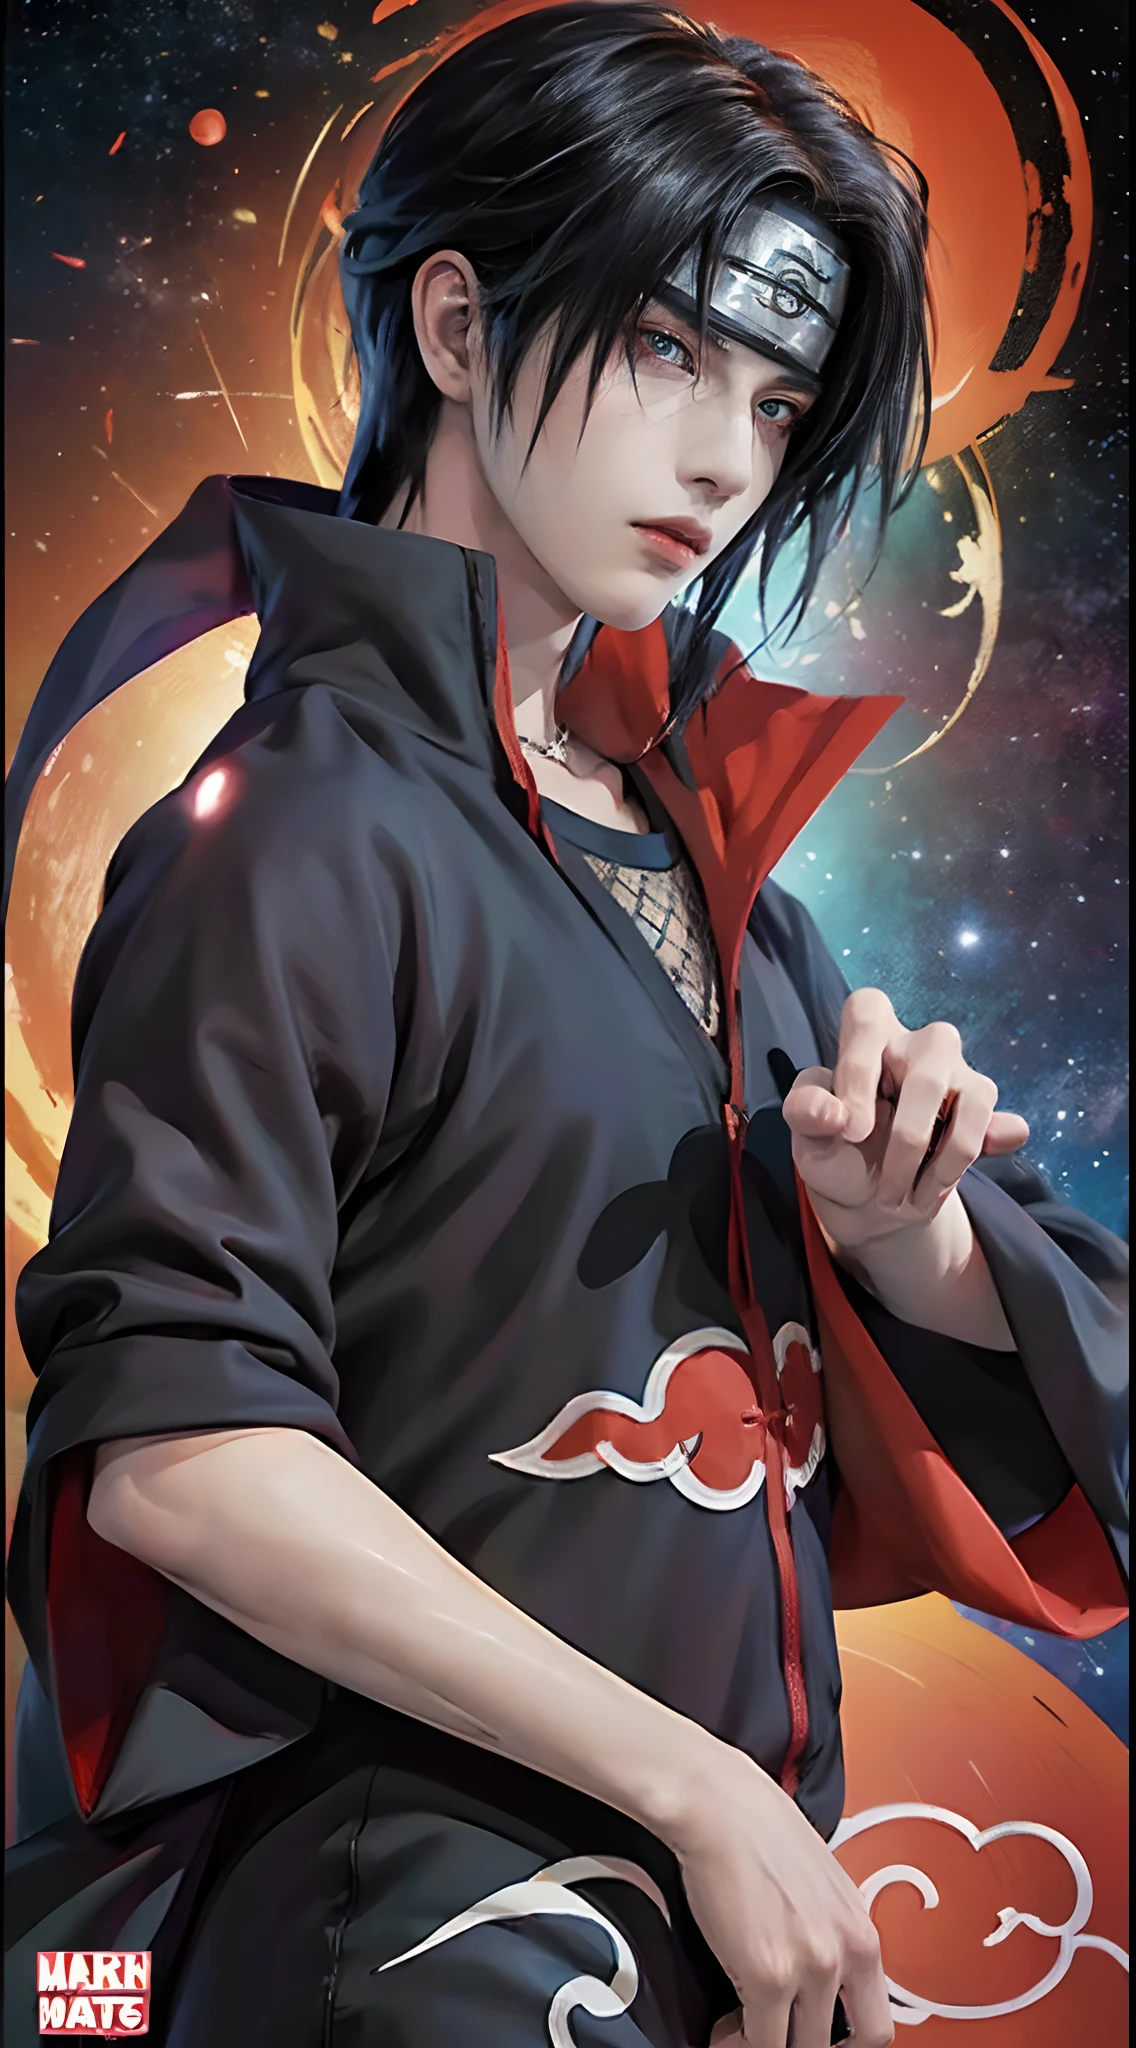 ((4K works))、​masterpiece、（top-quality)、((high-level image quality))、((One Manly Boy))、Slim body、((Date Cosplay))、((Uchiha Itachi))、((Cosplay))、(Detailed beautiful eyes)、((Smaller face))、((Neutral face))、((18year old))、((Handsome man))、((photo of a model))、((Like a celebrity))、Professional Photos、((cosplay foto))、((Shot alone))、((shot from a side angle))、((Naruto's Akatsuki Costume))、((Shinobi Pose))